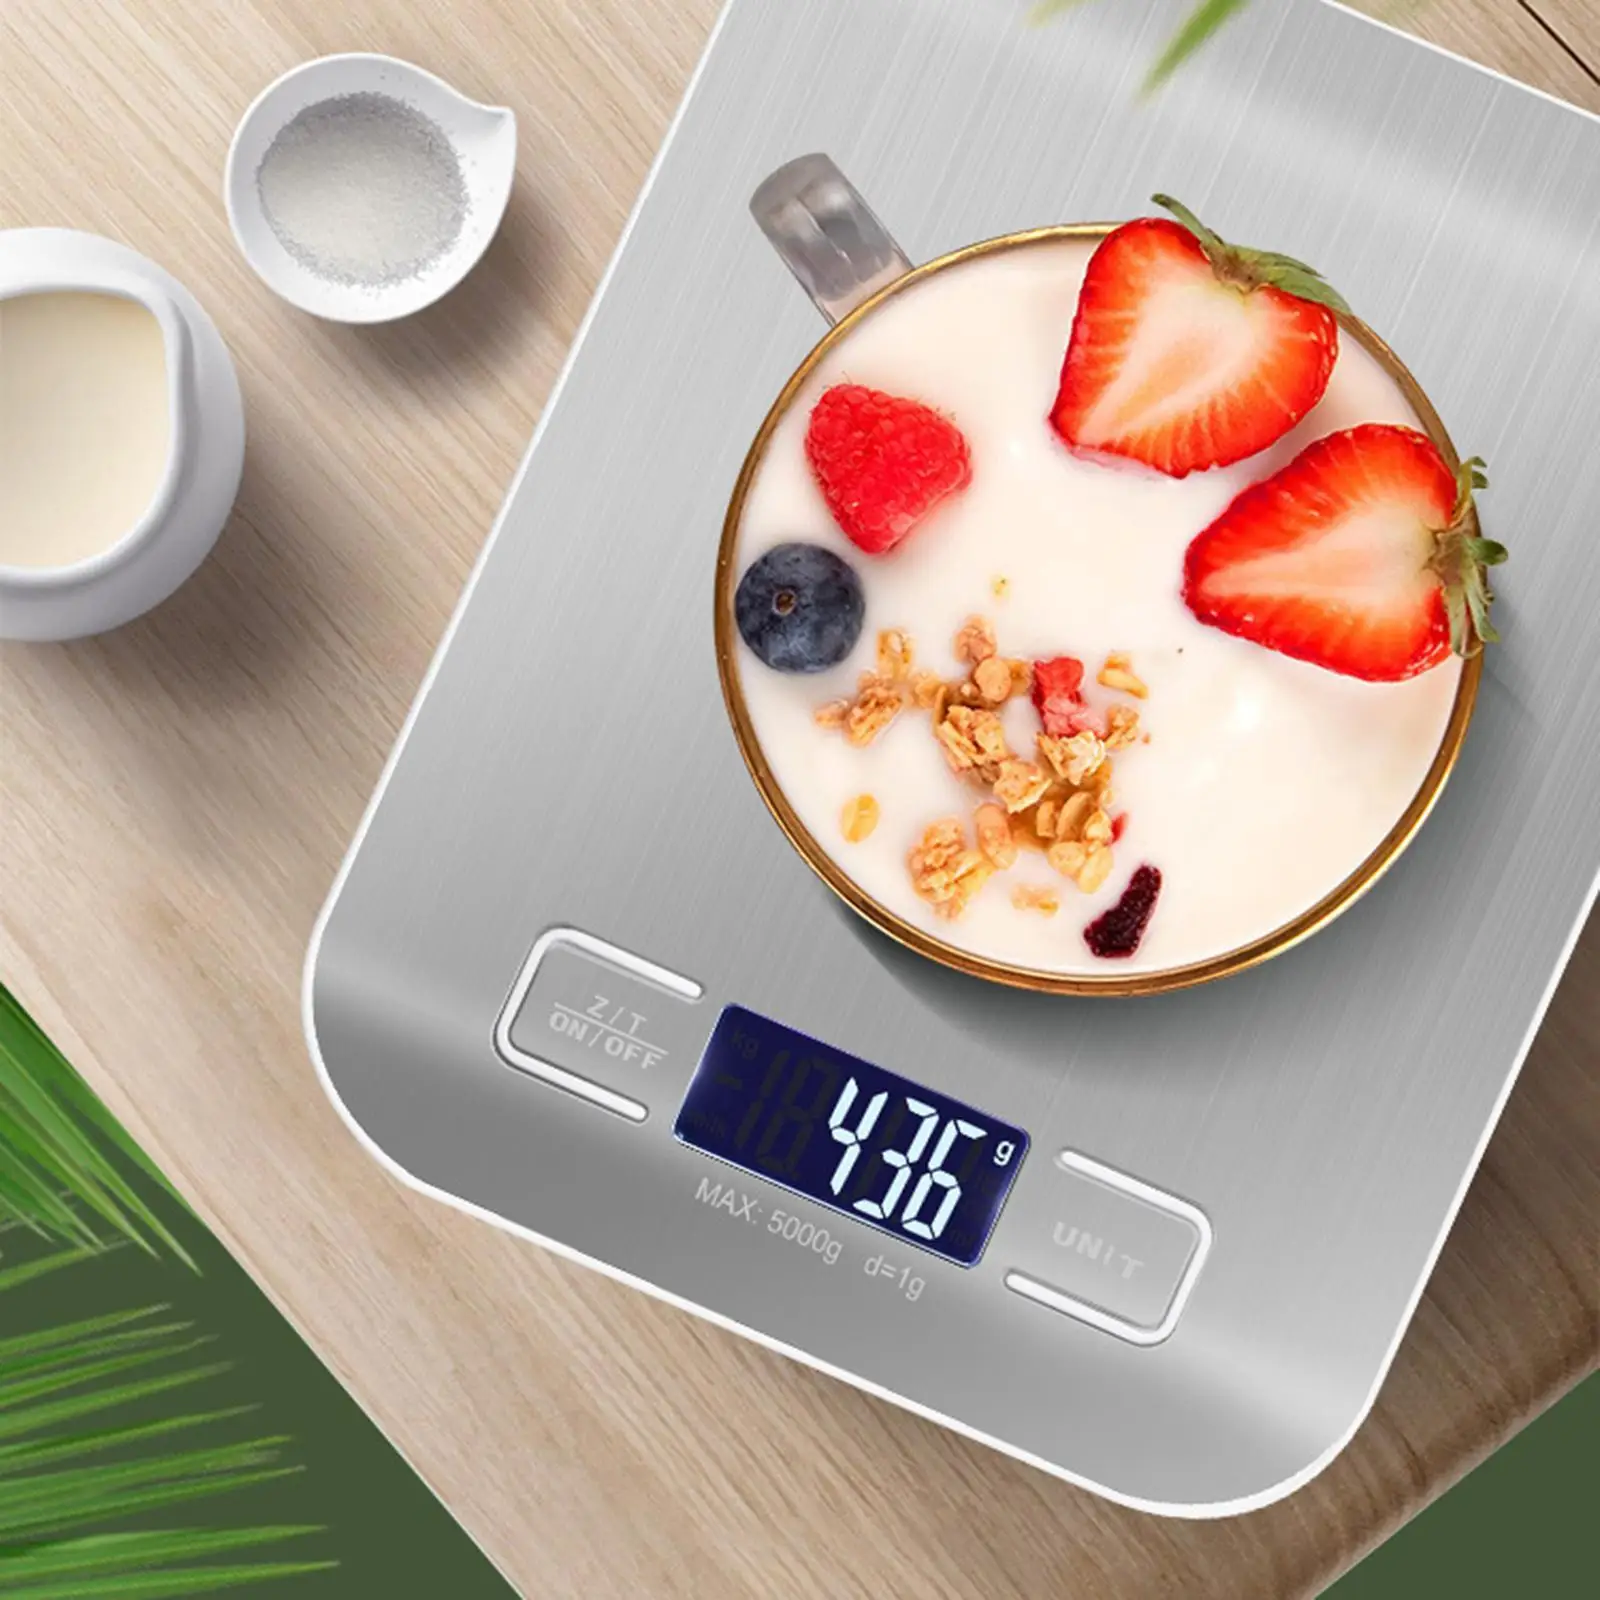 Digital Kitchen Scale Portable Mutritional Plates Food Accuracy for Cooking